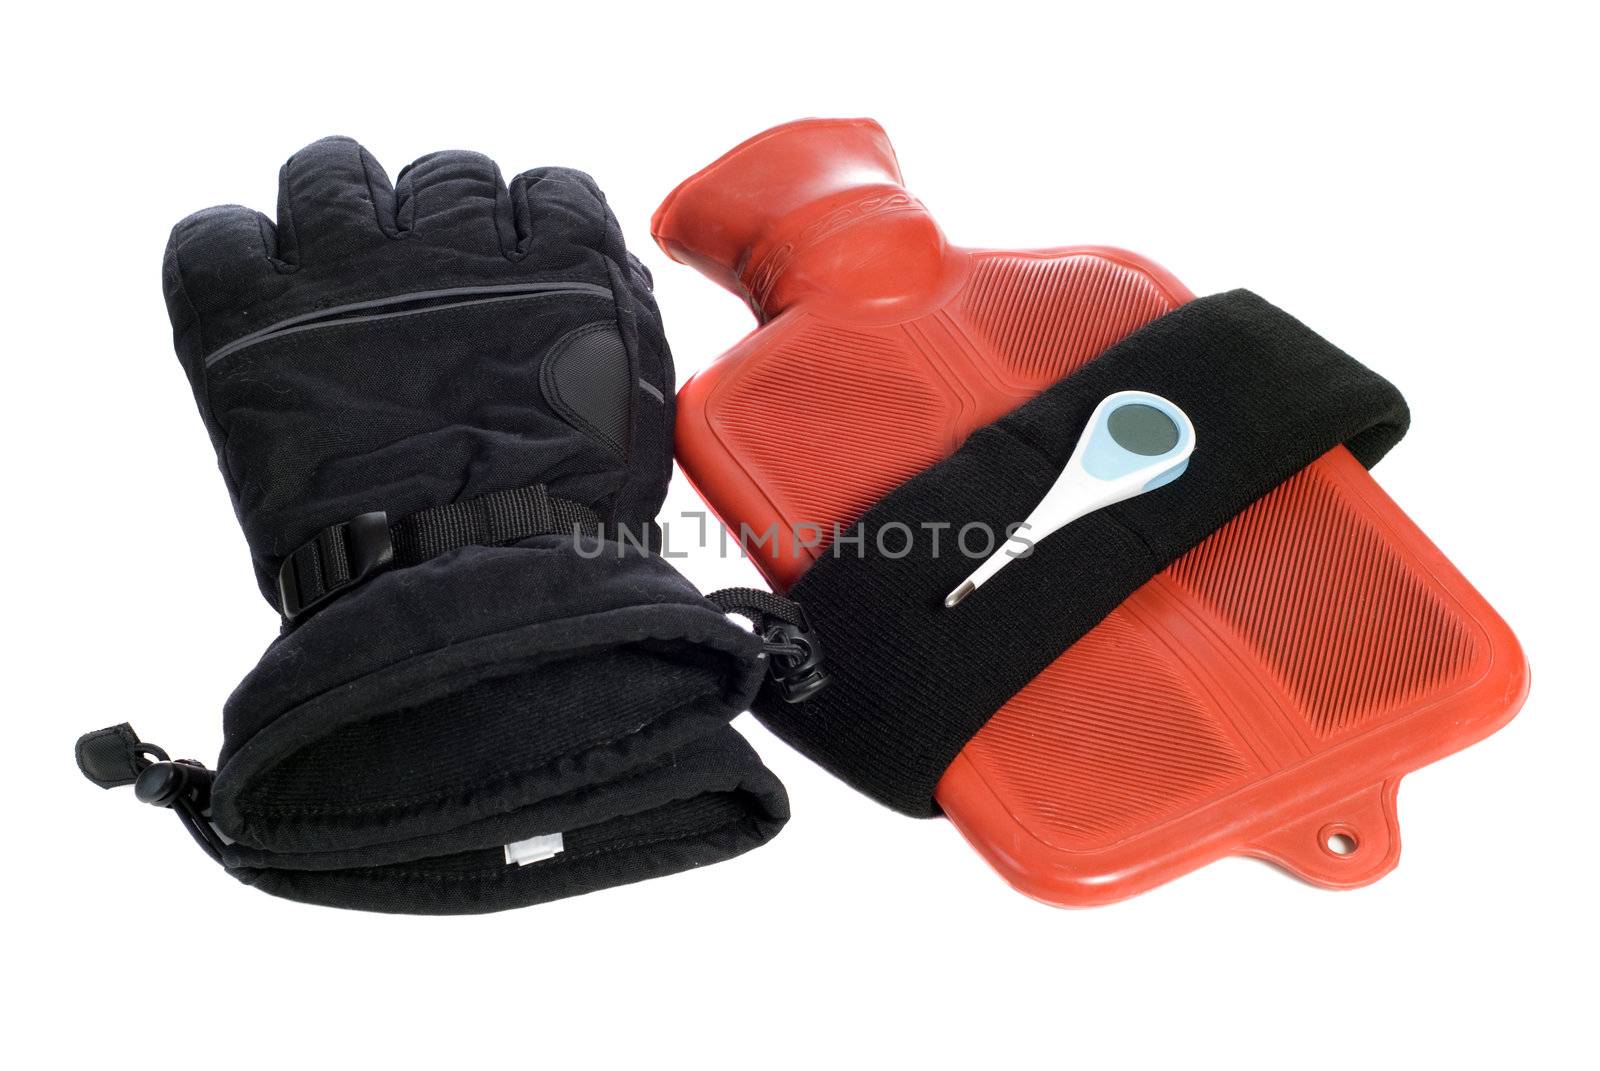 Some common objects that keep a body warm are gloves, a headband, and a hot water bottle, along with a thermometer to check the temp, isolated on white